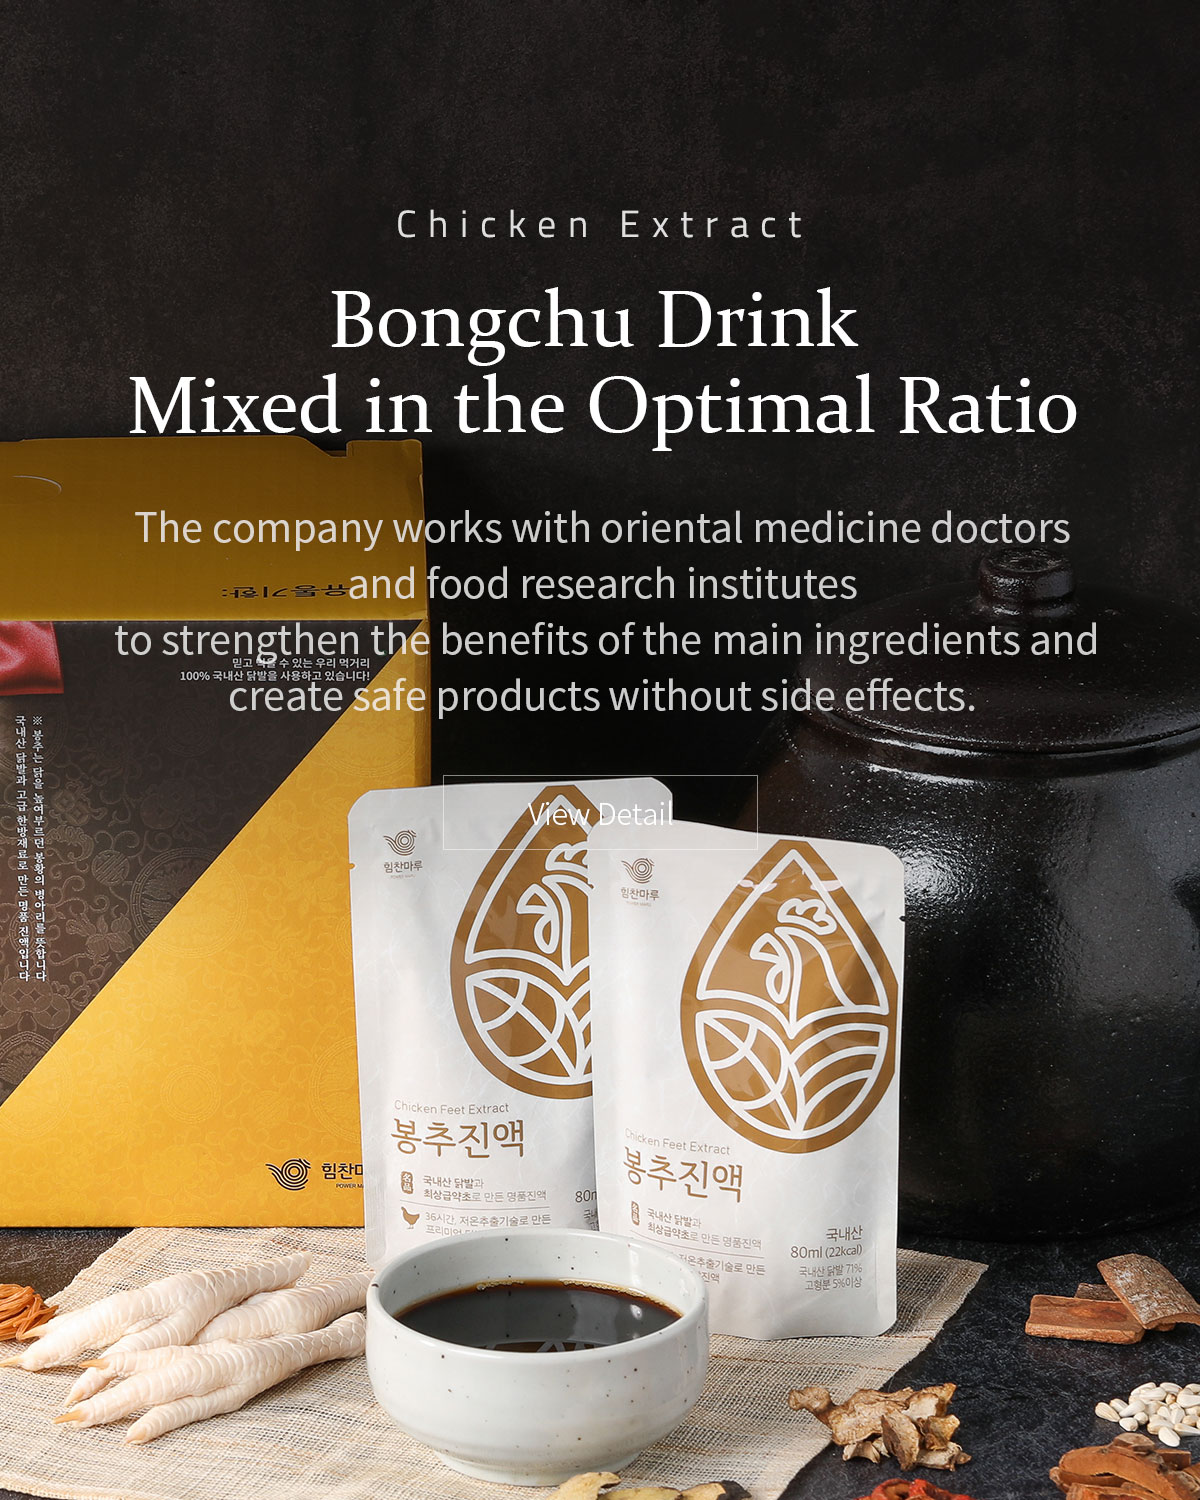 Bongchu Drink Mixed in the Optimal Ratio. The company works with oriental medicine doctors and food research institutes to strengthen the benefits of the main ingredients and create safe products without side effects.